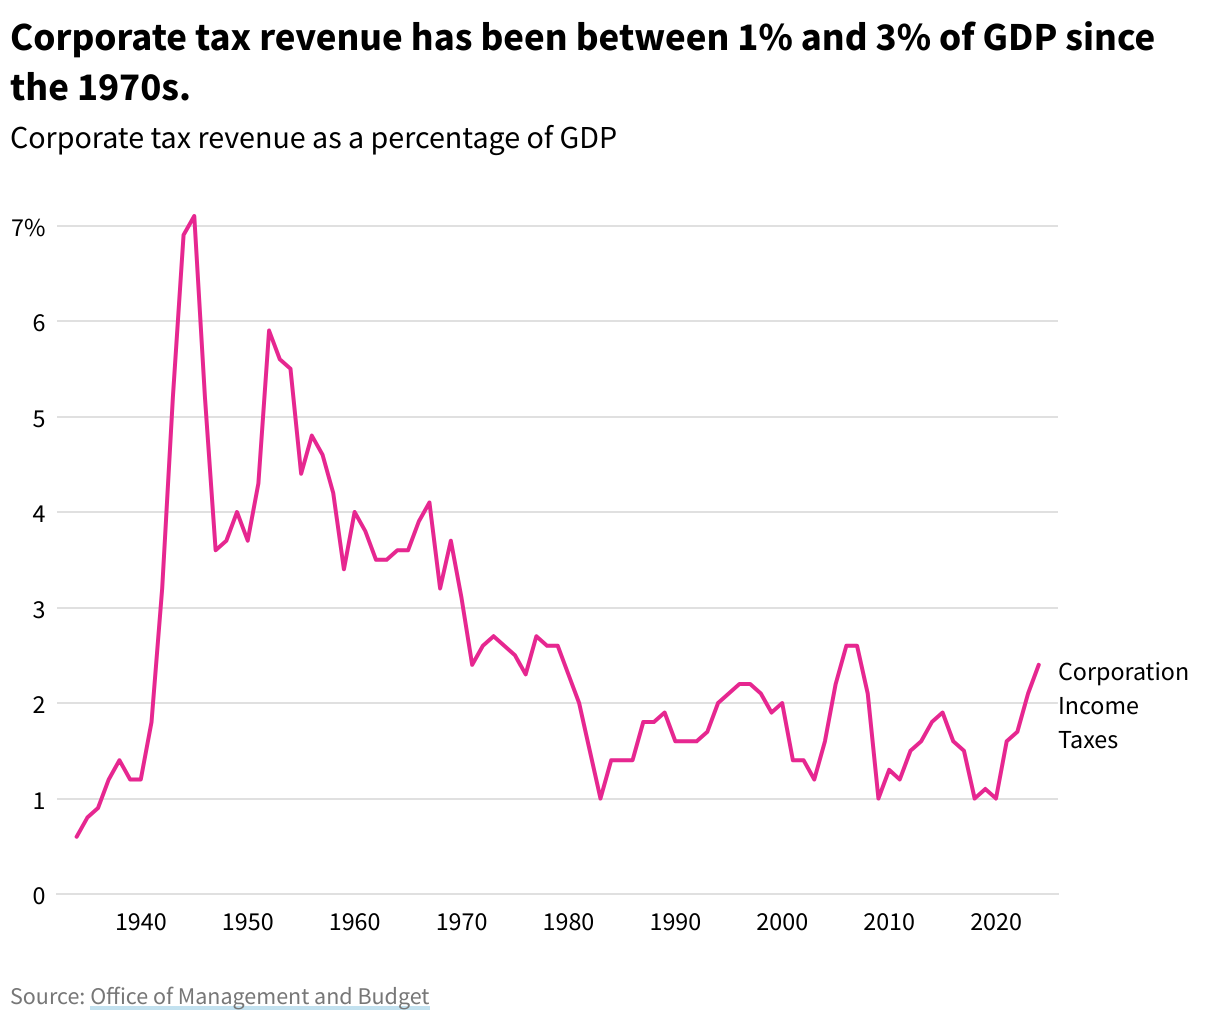 A line chart showing corporate tax revenue as a percentage of GDP.